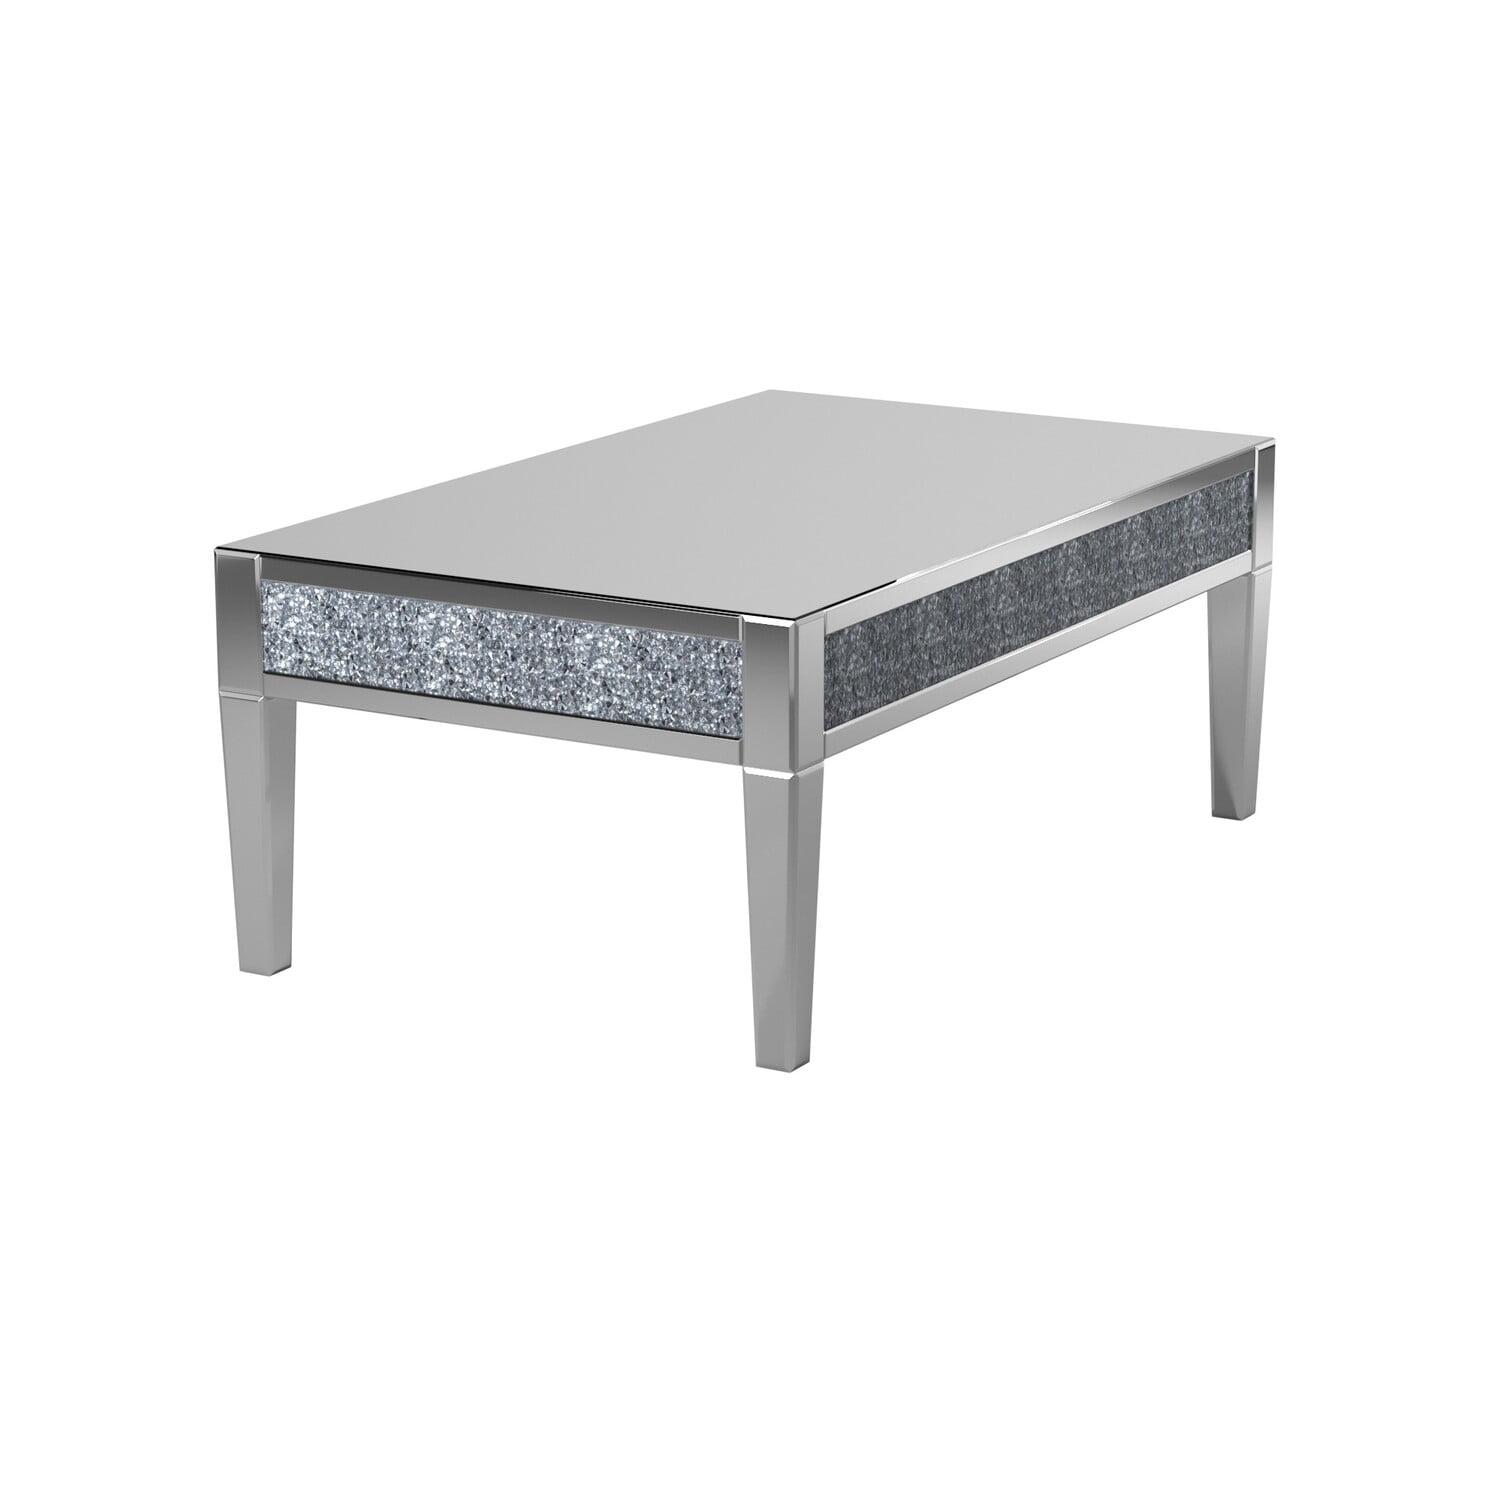 Elegant Rectangular Wood and Glass Coffee Table with Mirrored Finish and Faux Crystal Inlay